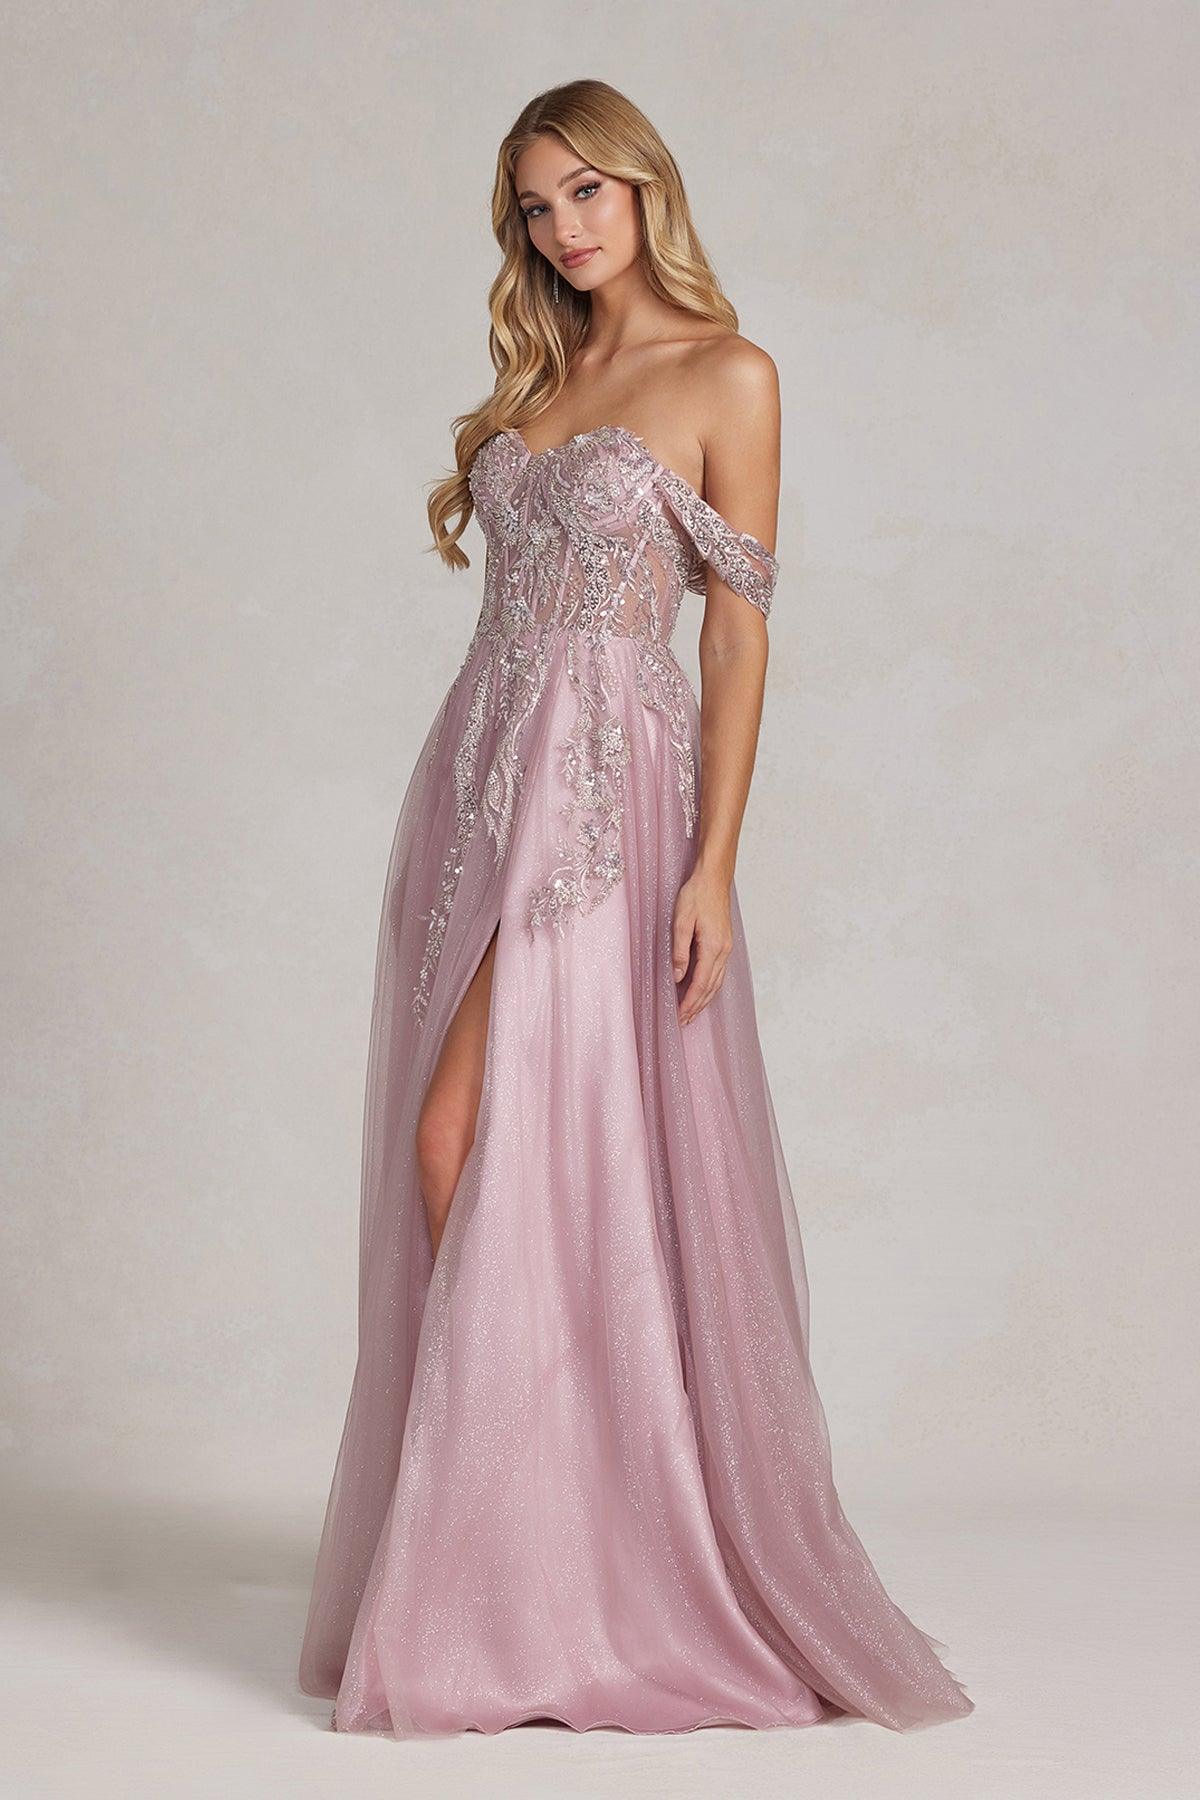 Nox Anabel E1128 Long Off Shoulder Beaded Prom Gown Rose